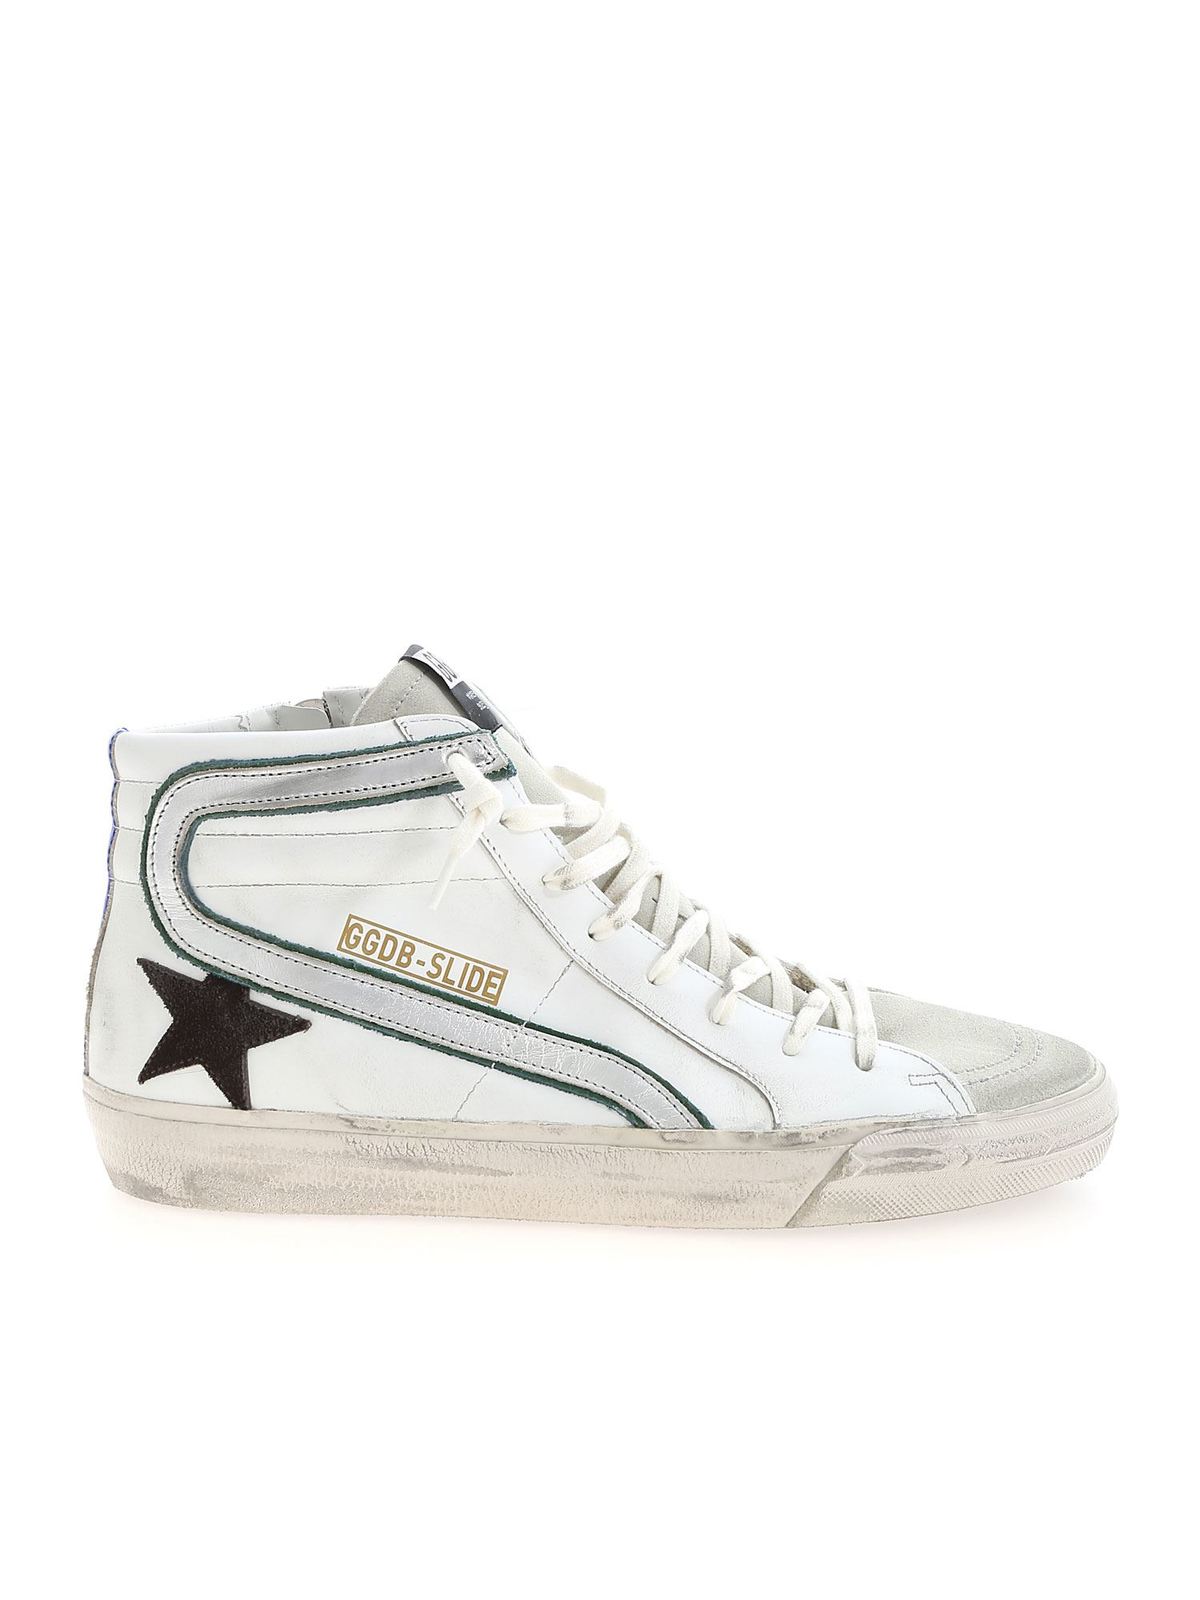 Trainers Golden Goose - Slide Classic sneakers in white ...